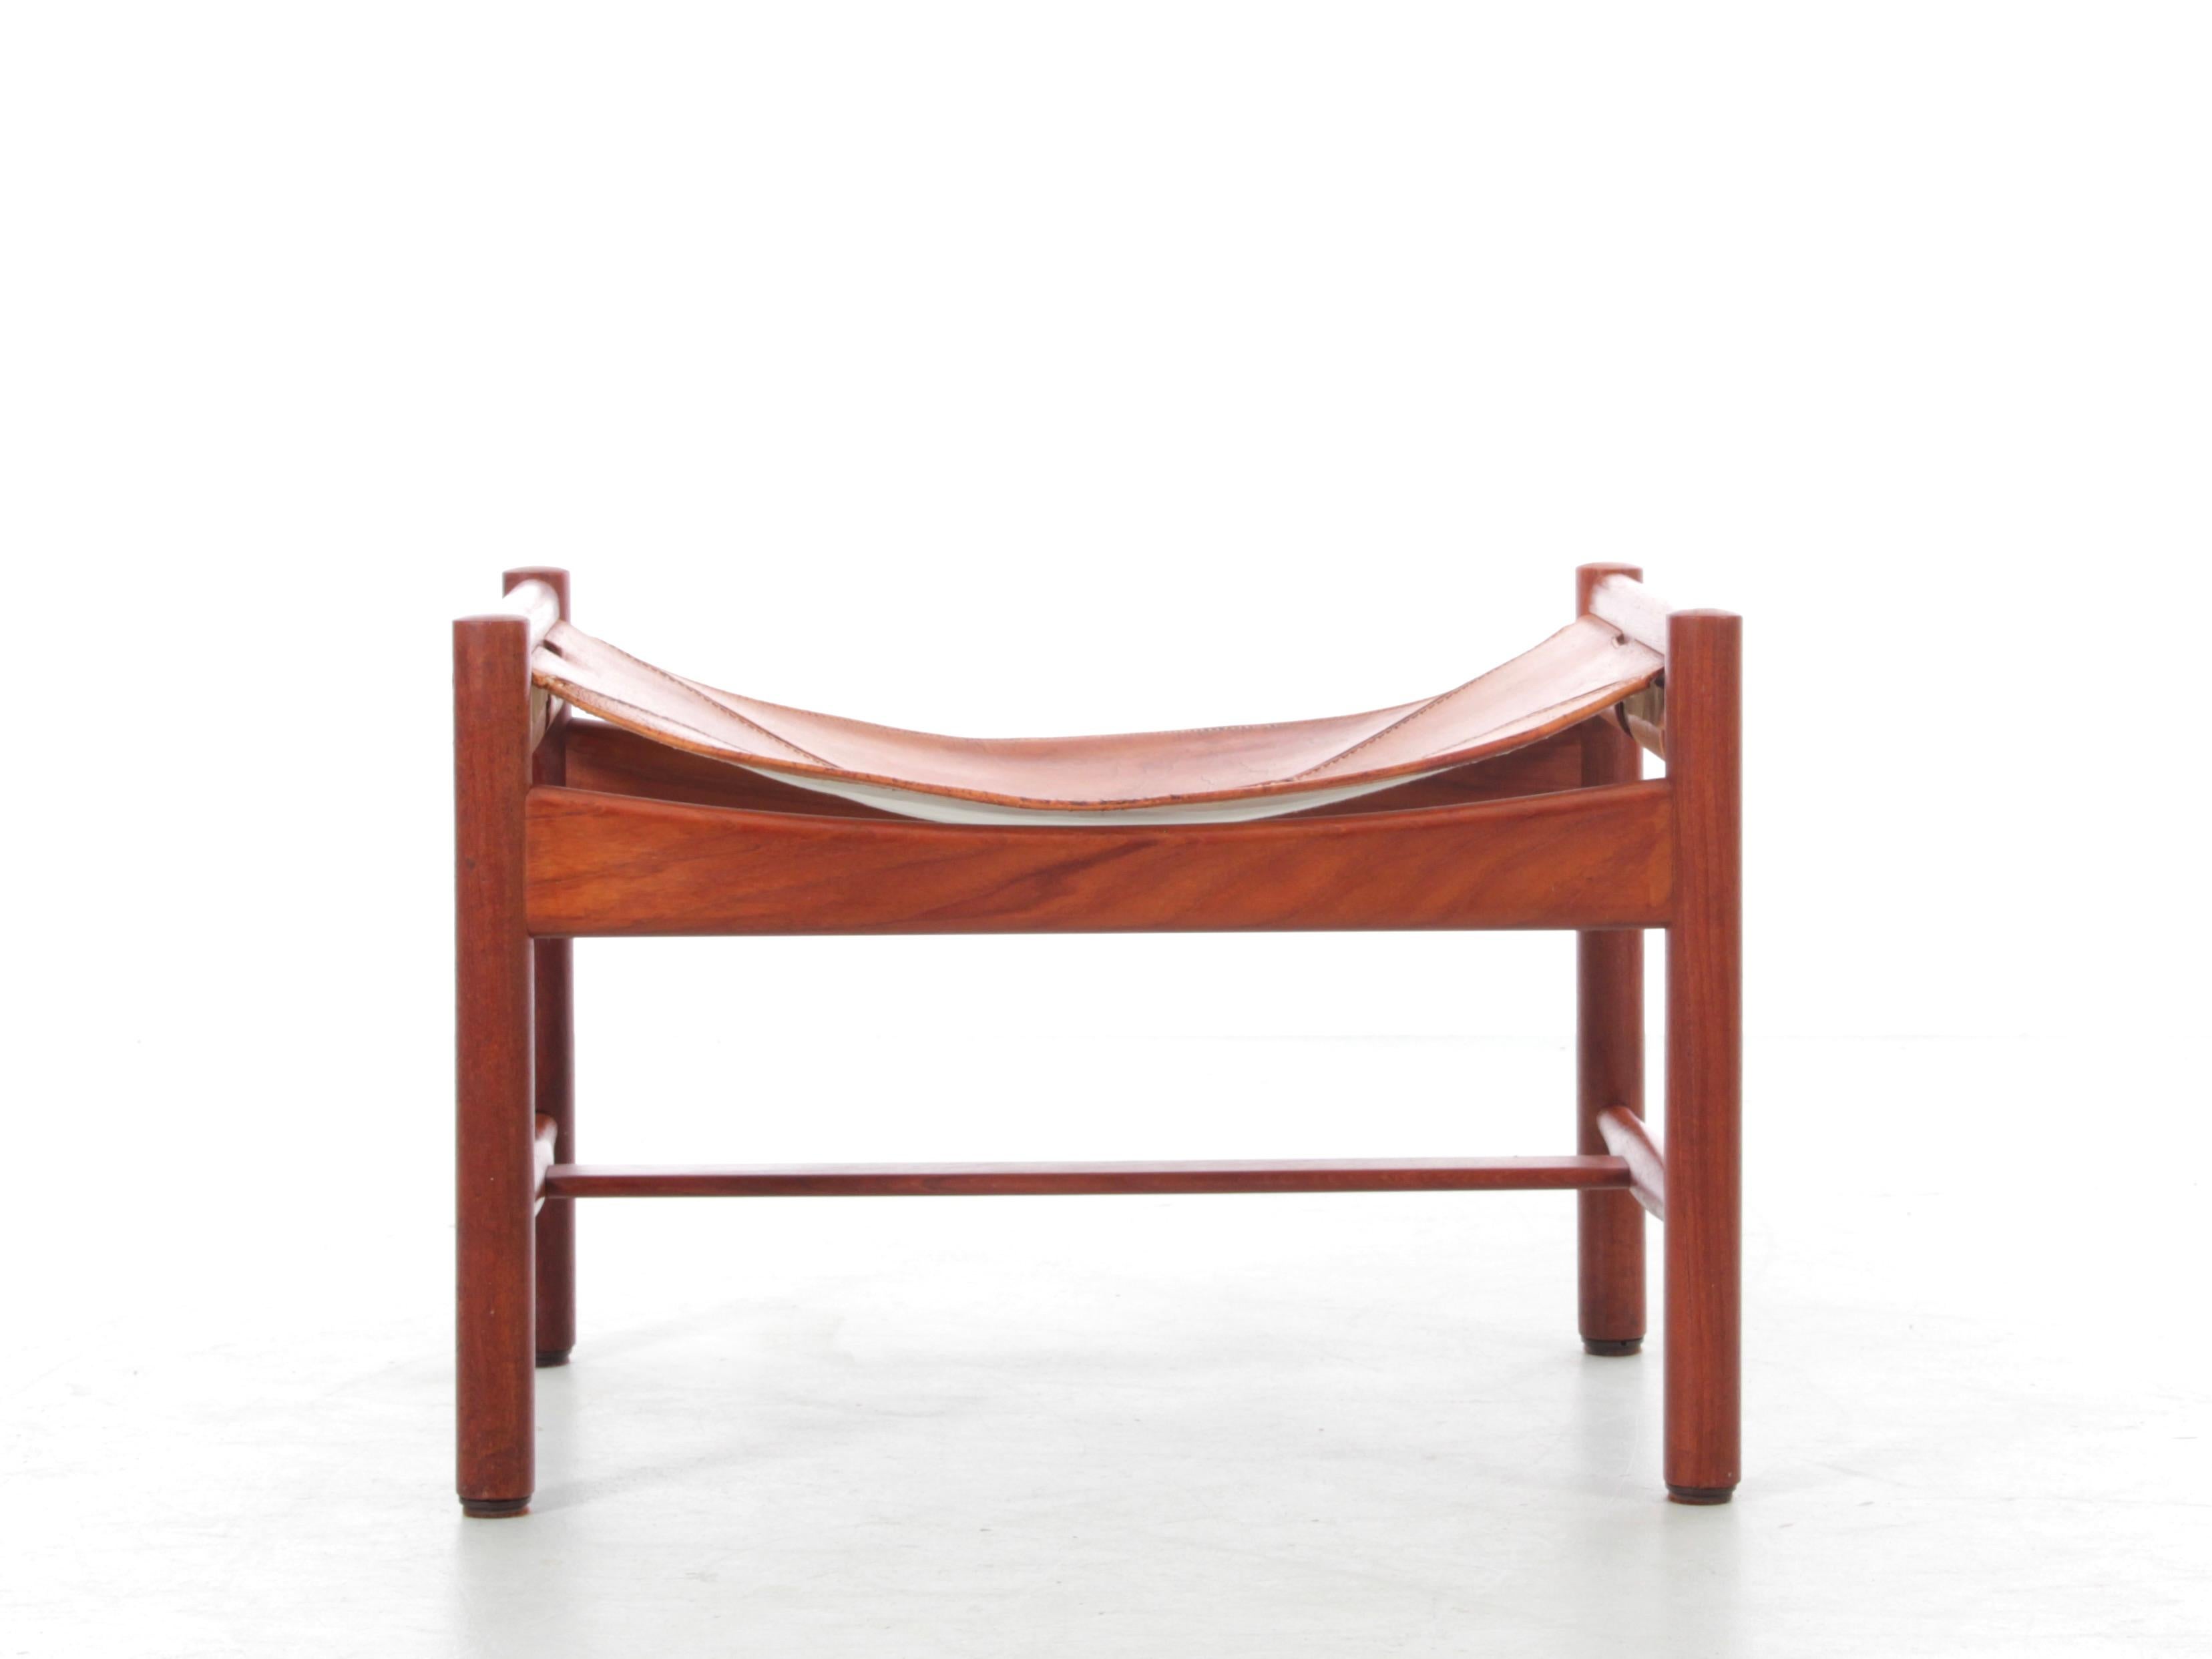 Mid modern Scandinavian ottoman by Kurt Olsen in teak and leather. This footstool features a teak frame paired with its original natural leather seat, which exhibits a charming, enduring patina suitable for everyday use. Its rounded legs and